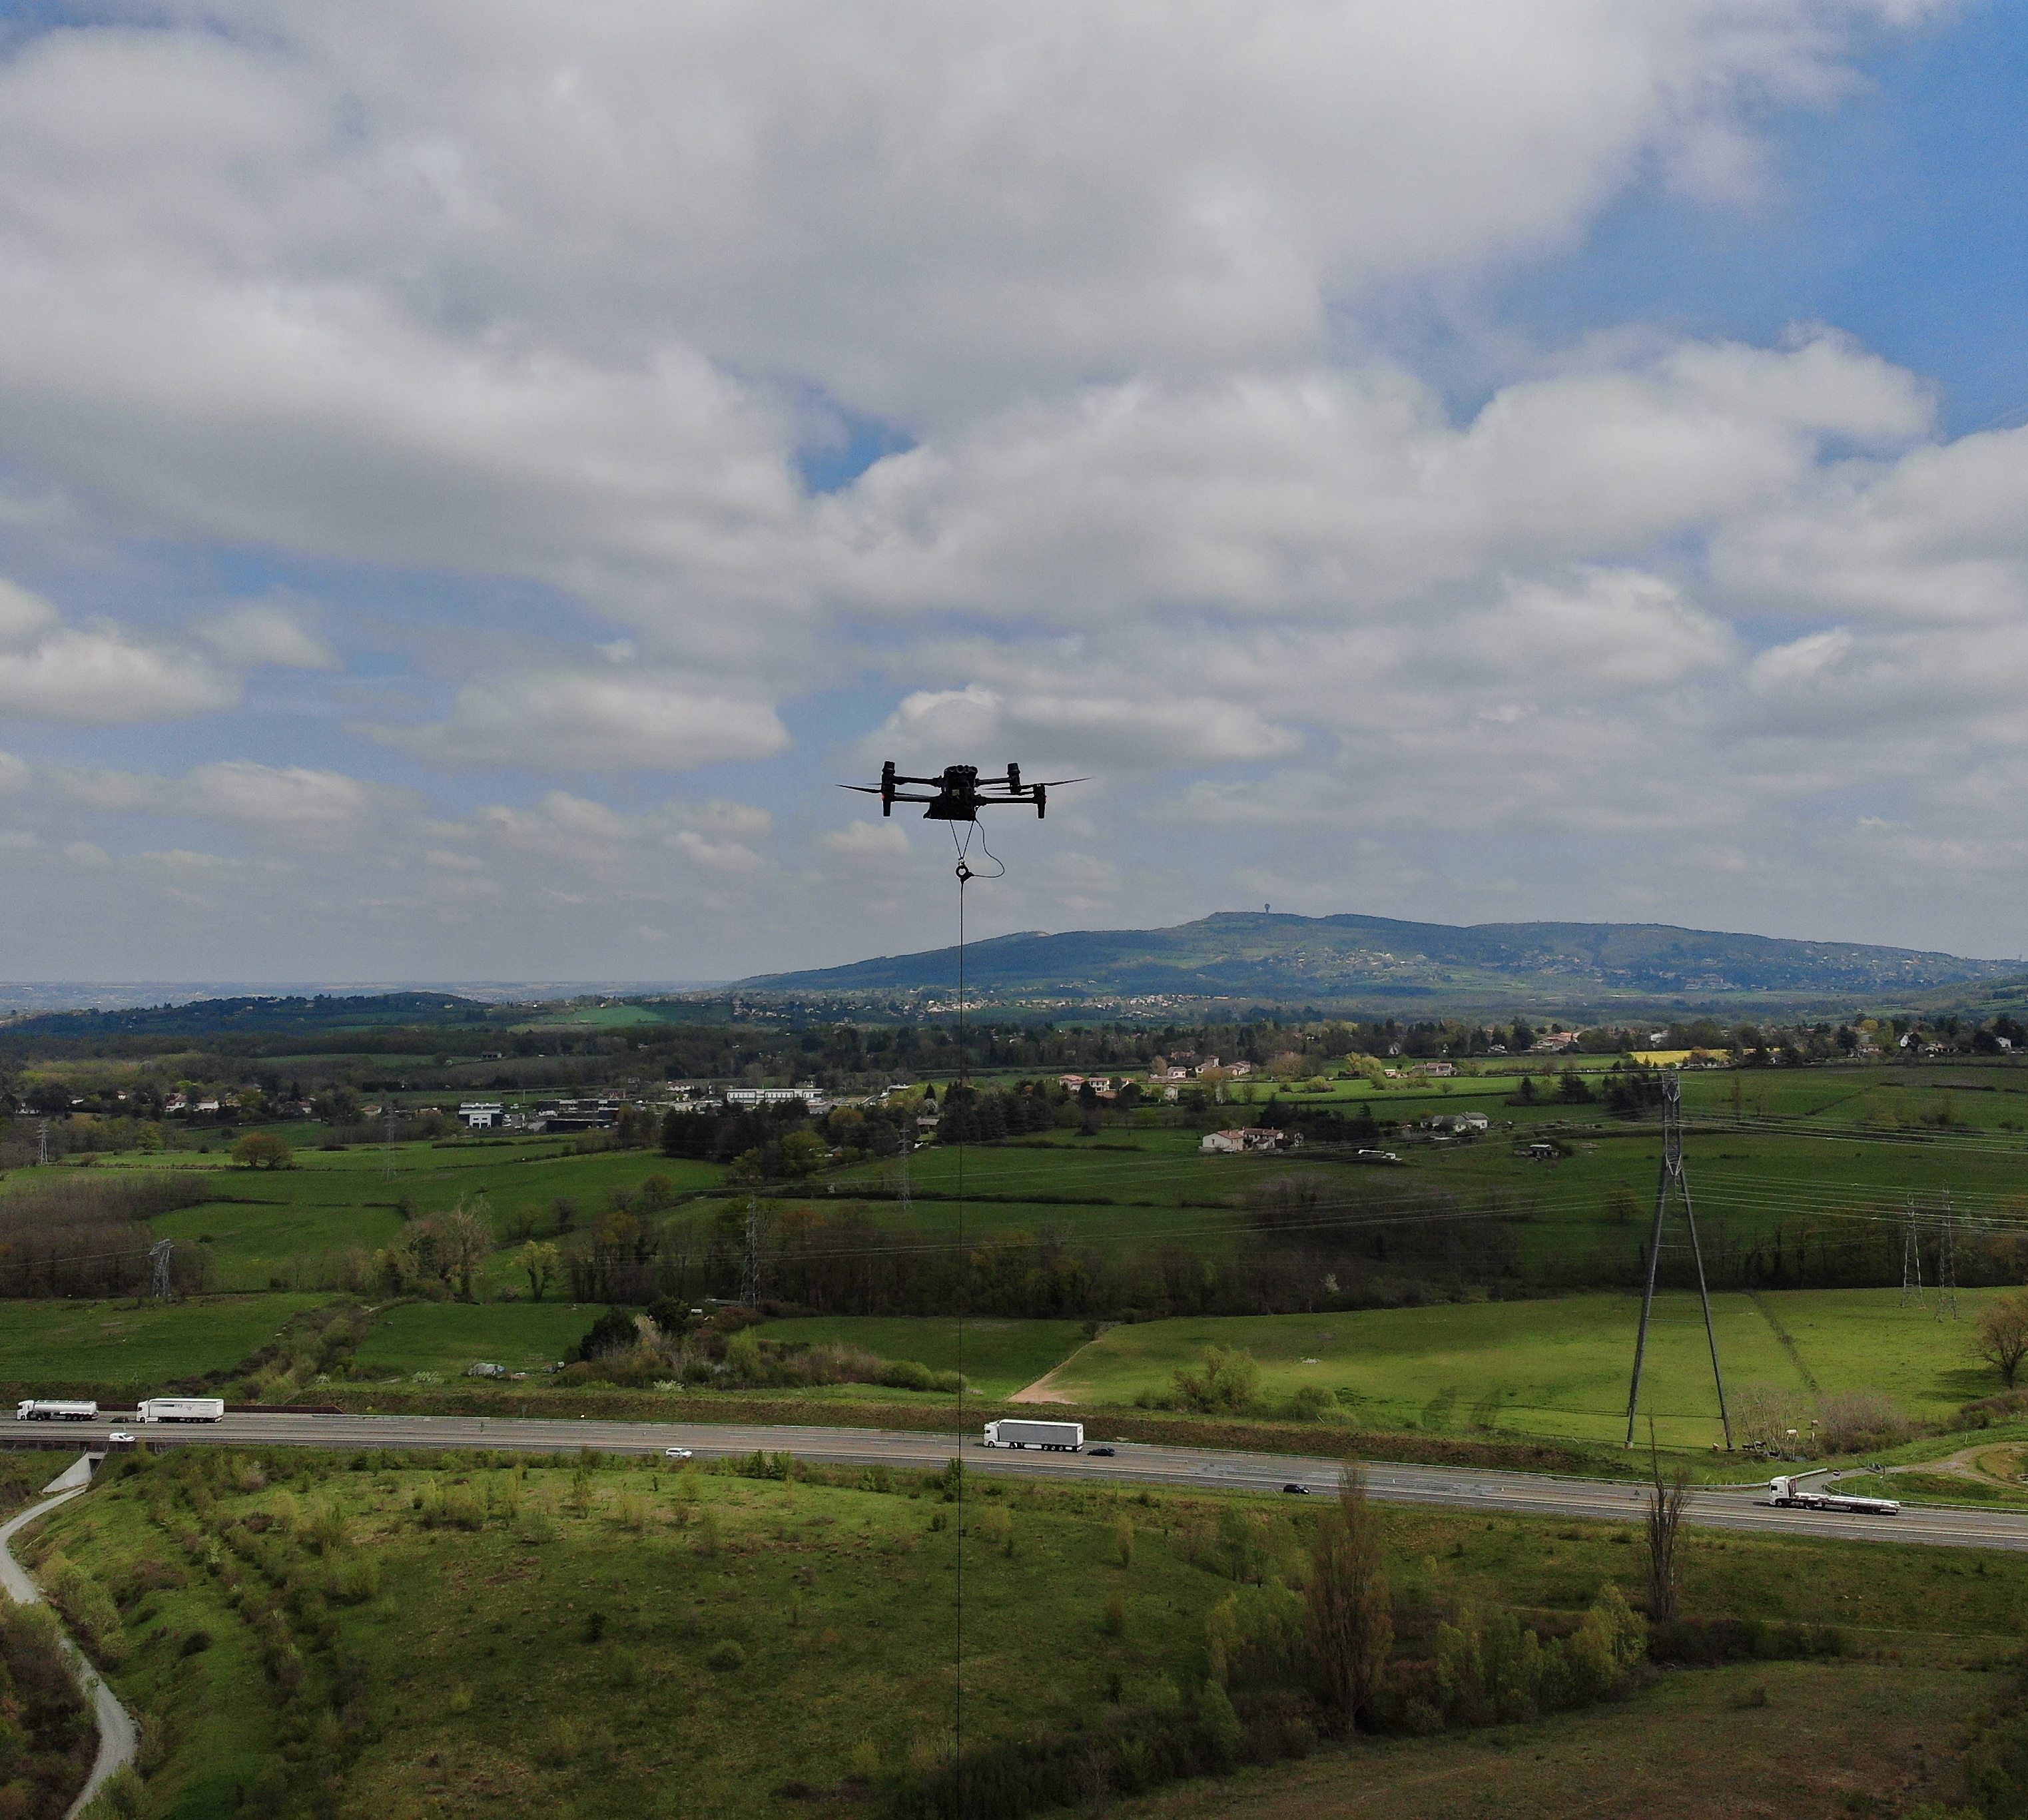 Tethered drone flying over a scenic landscape with hills and fields